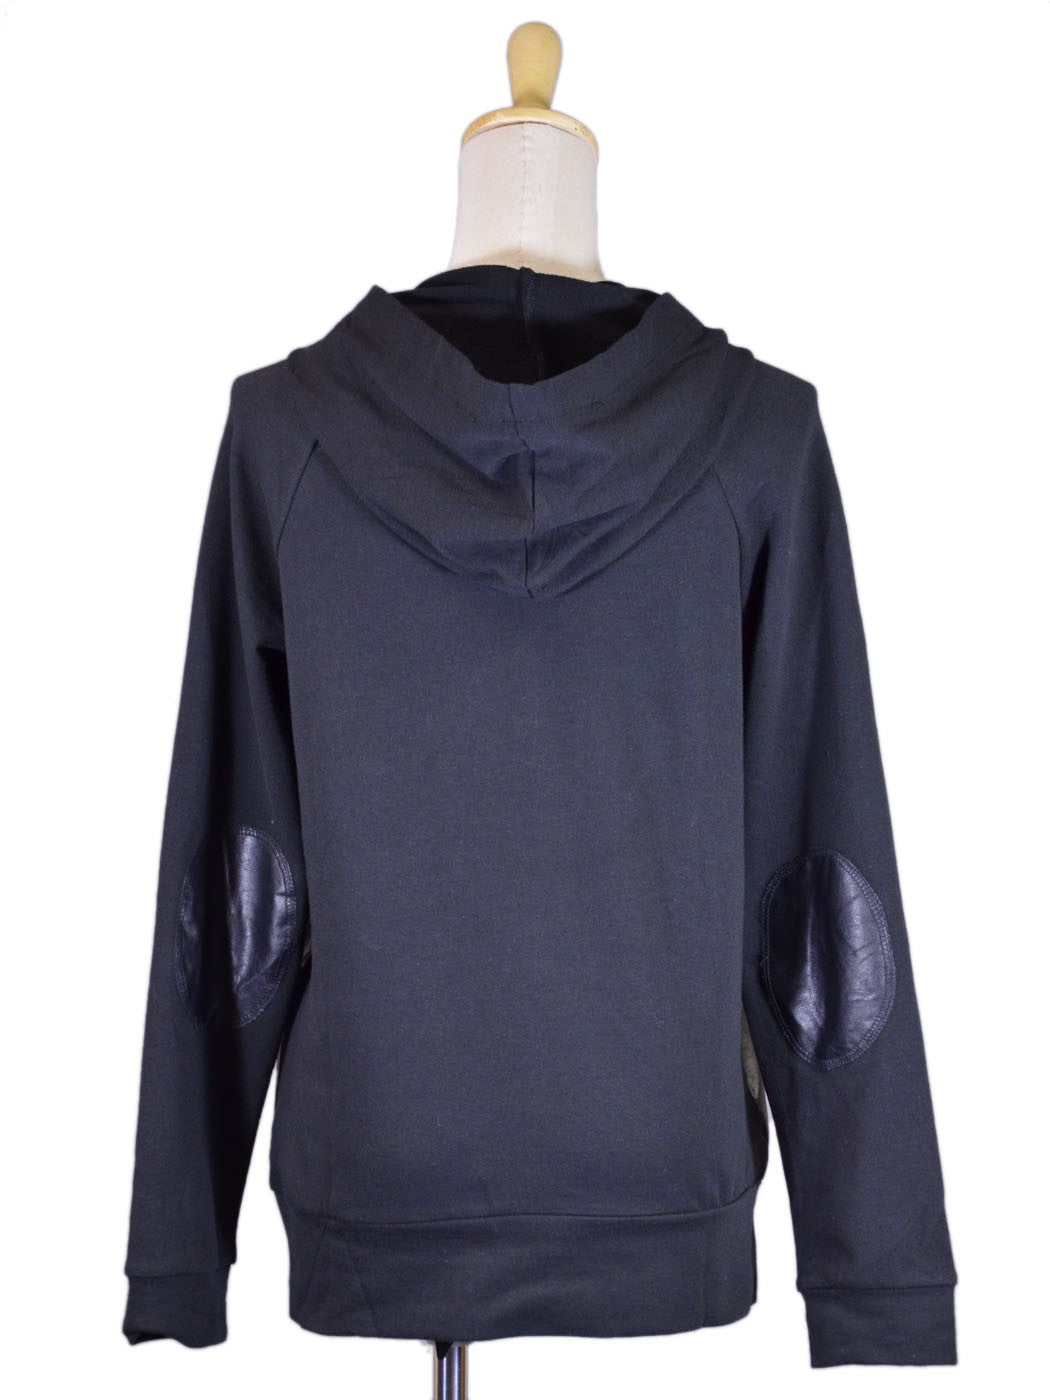 Tresics Brand Black Faux Leather Front and Elbow Patches Sweatshirt